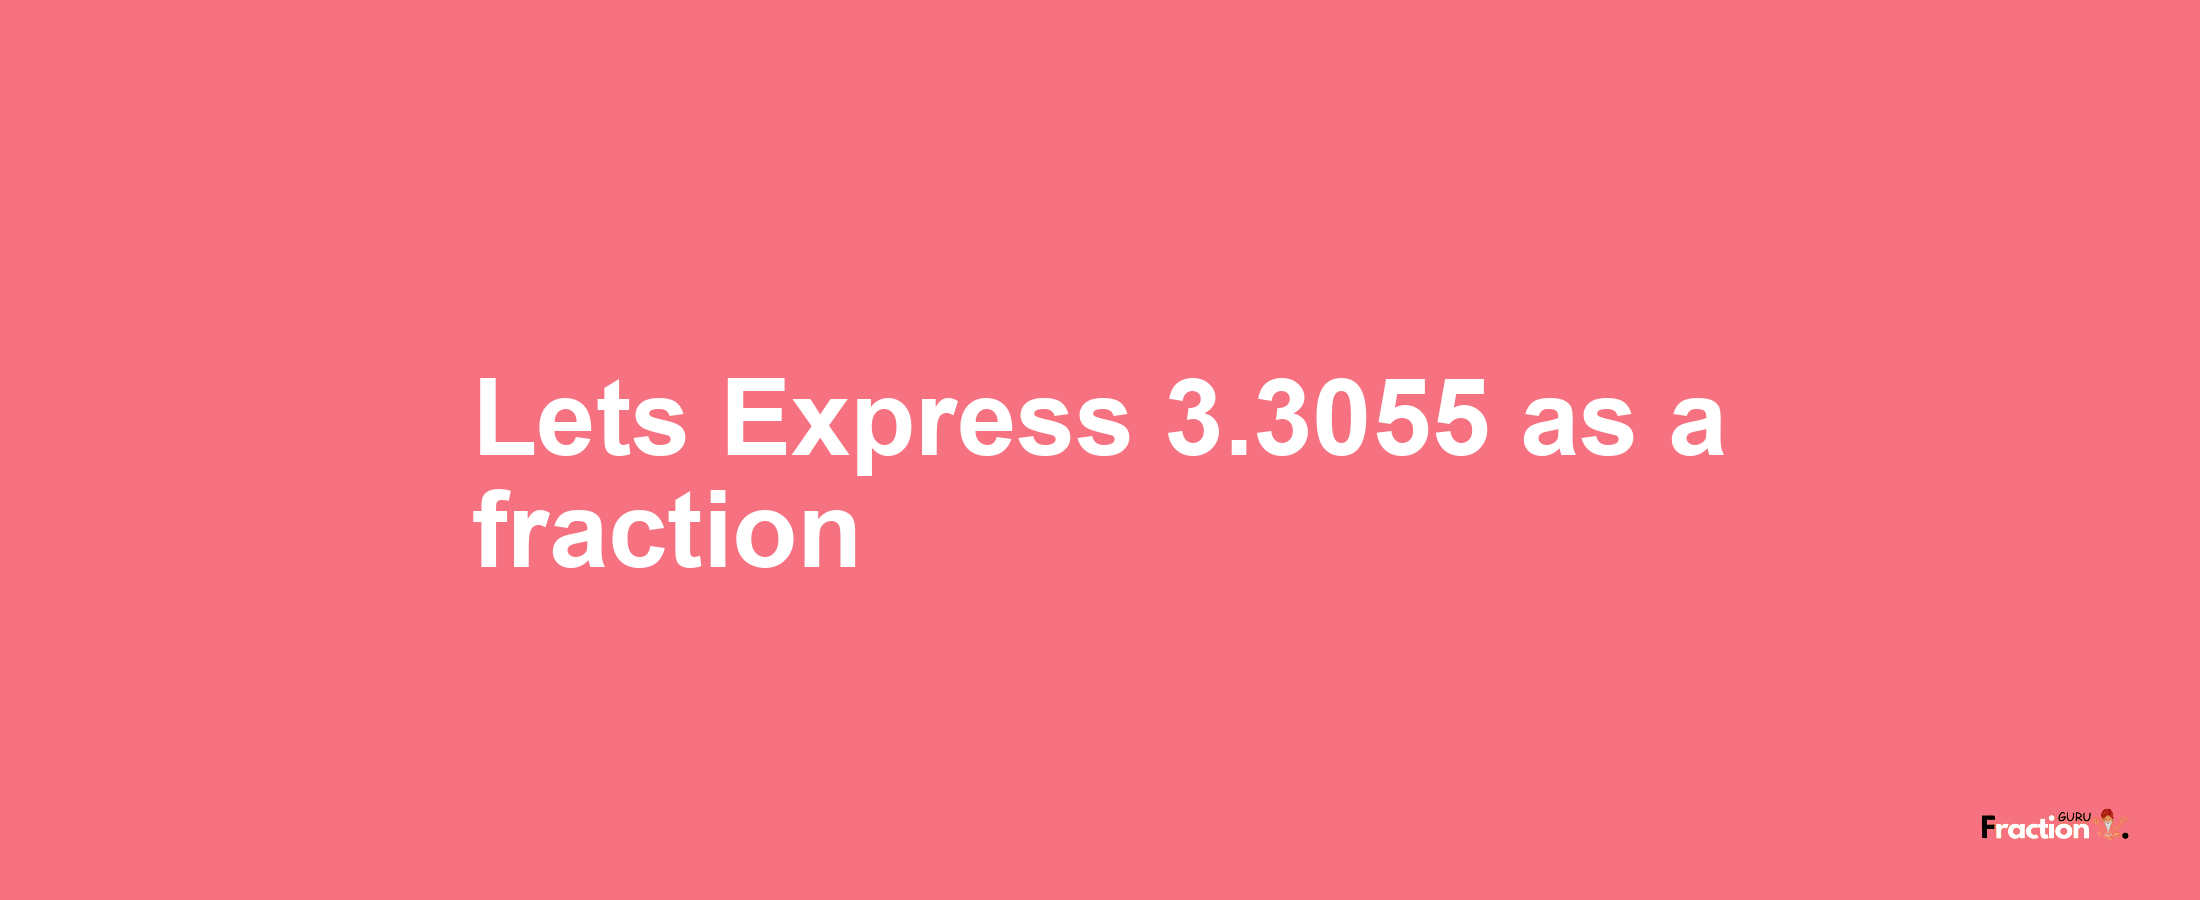 Lets Express 3.3055 as afraction